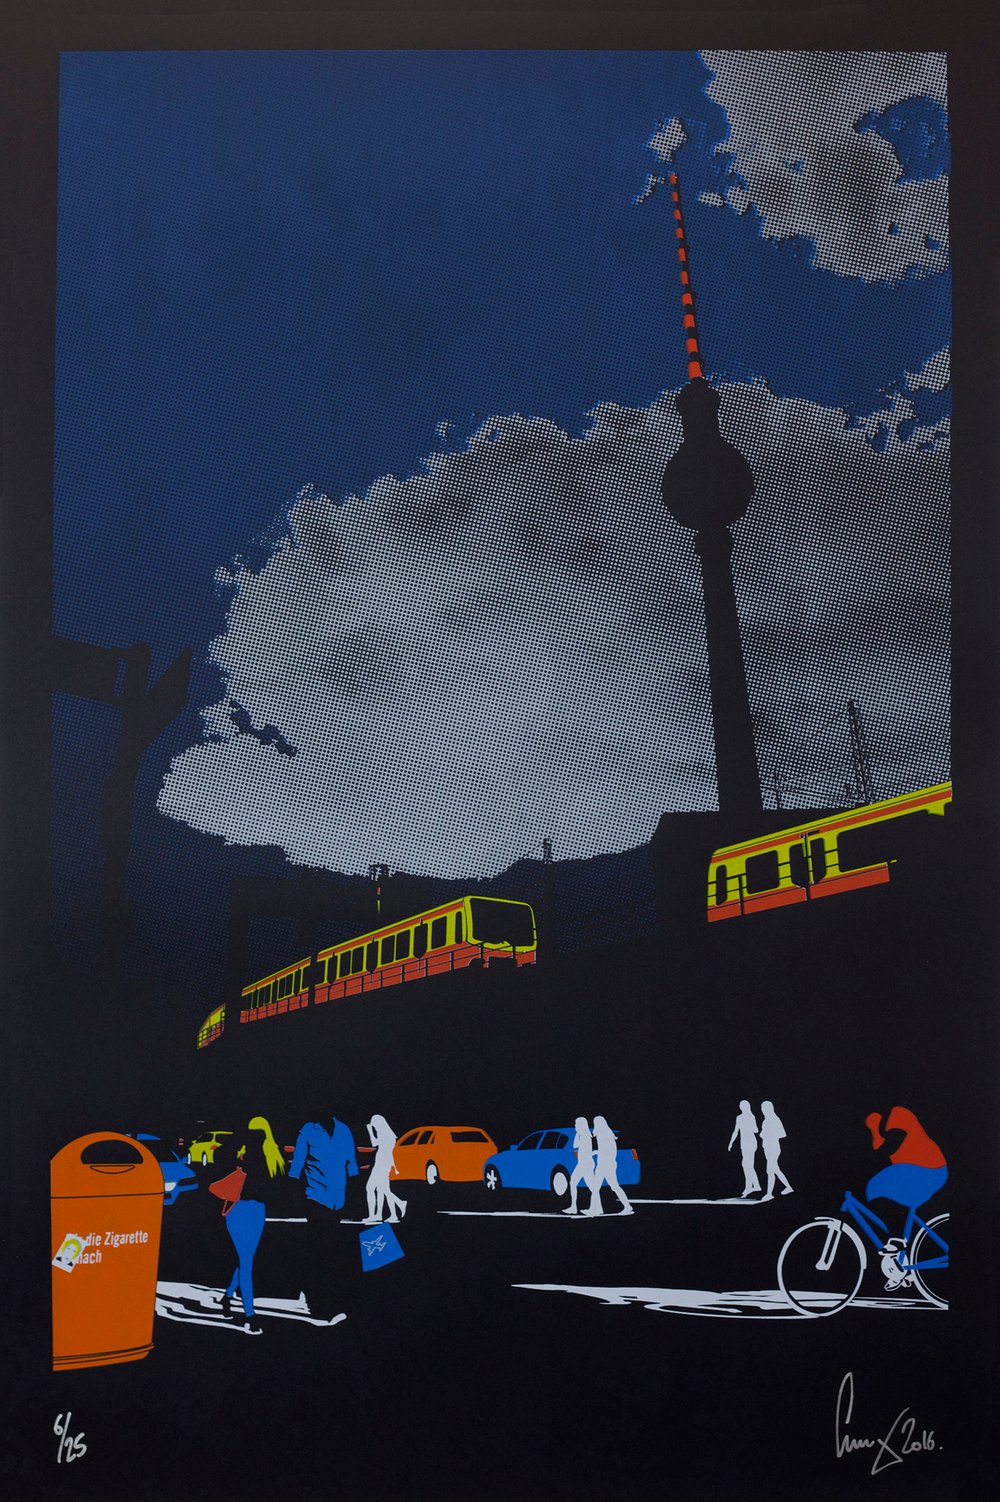 Image of A1 Berlin silhouettes